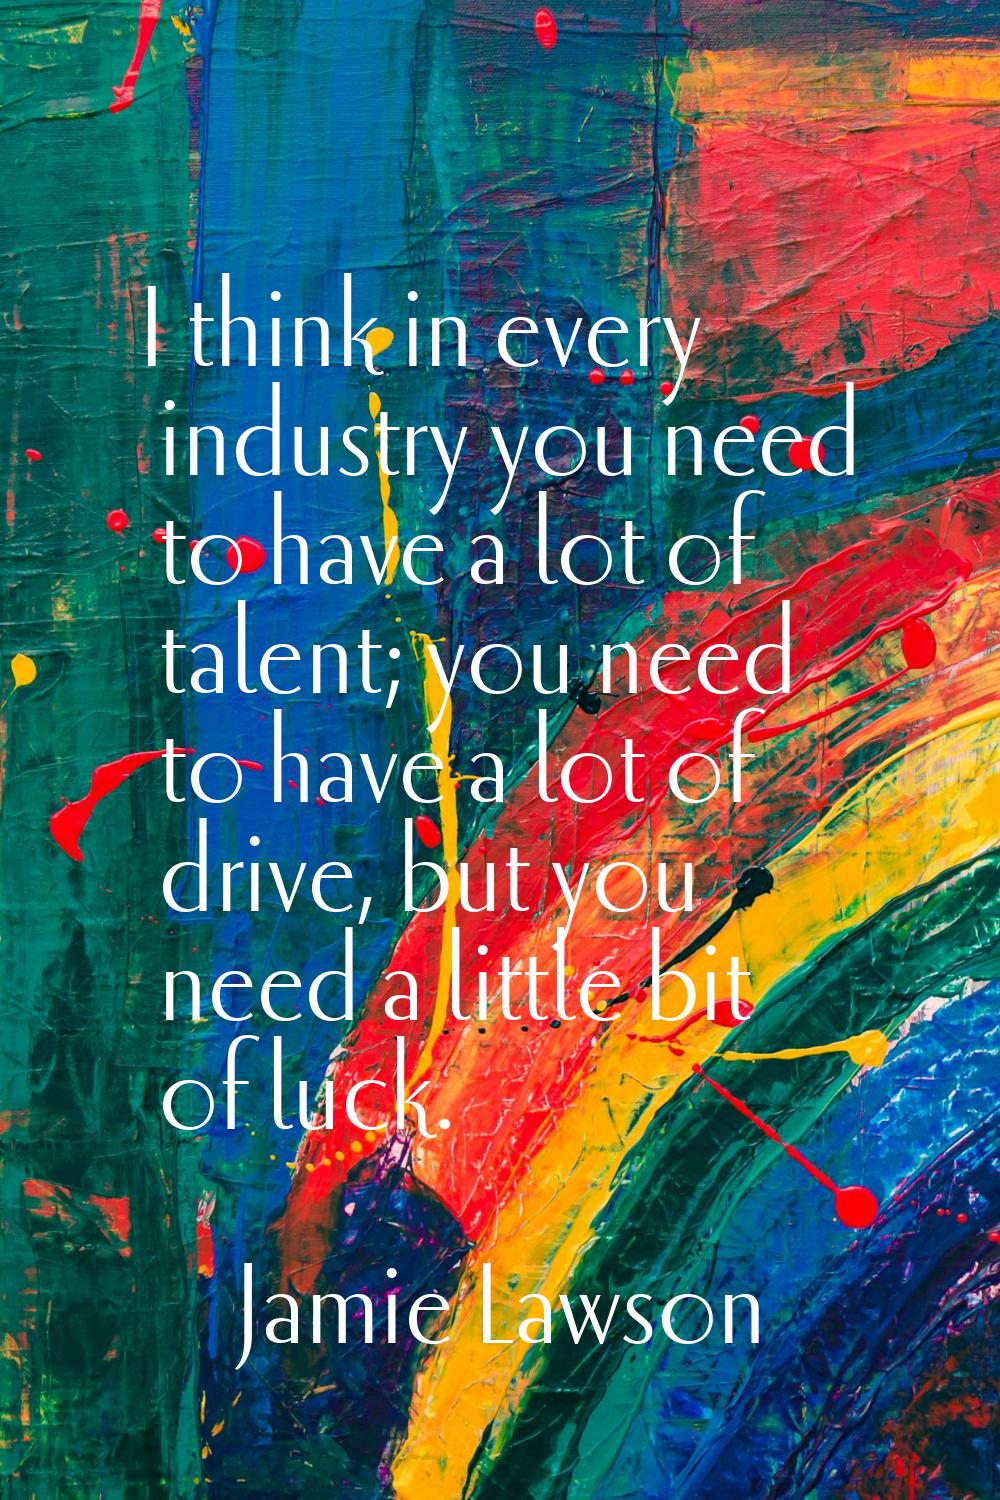 I think in every industry you need to have a lot of talent; you need to have a lot of drive, but yo